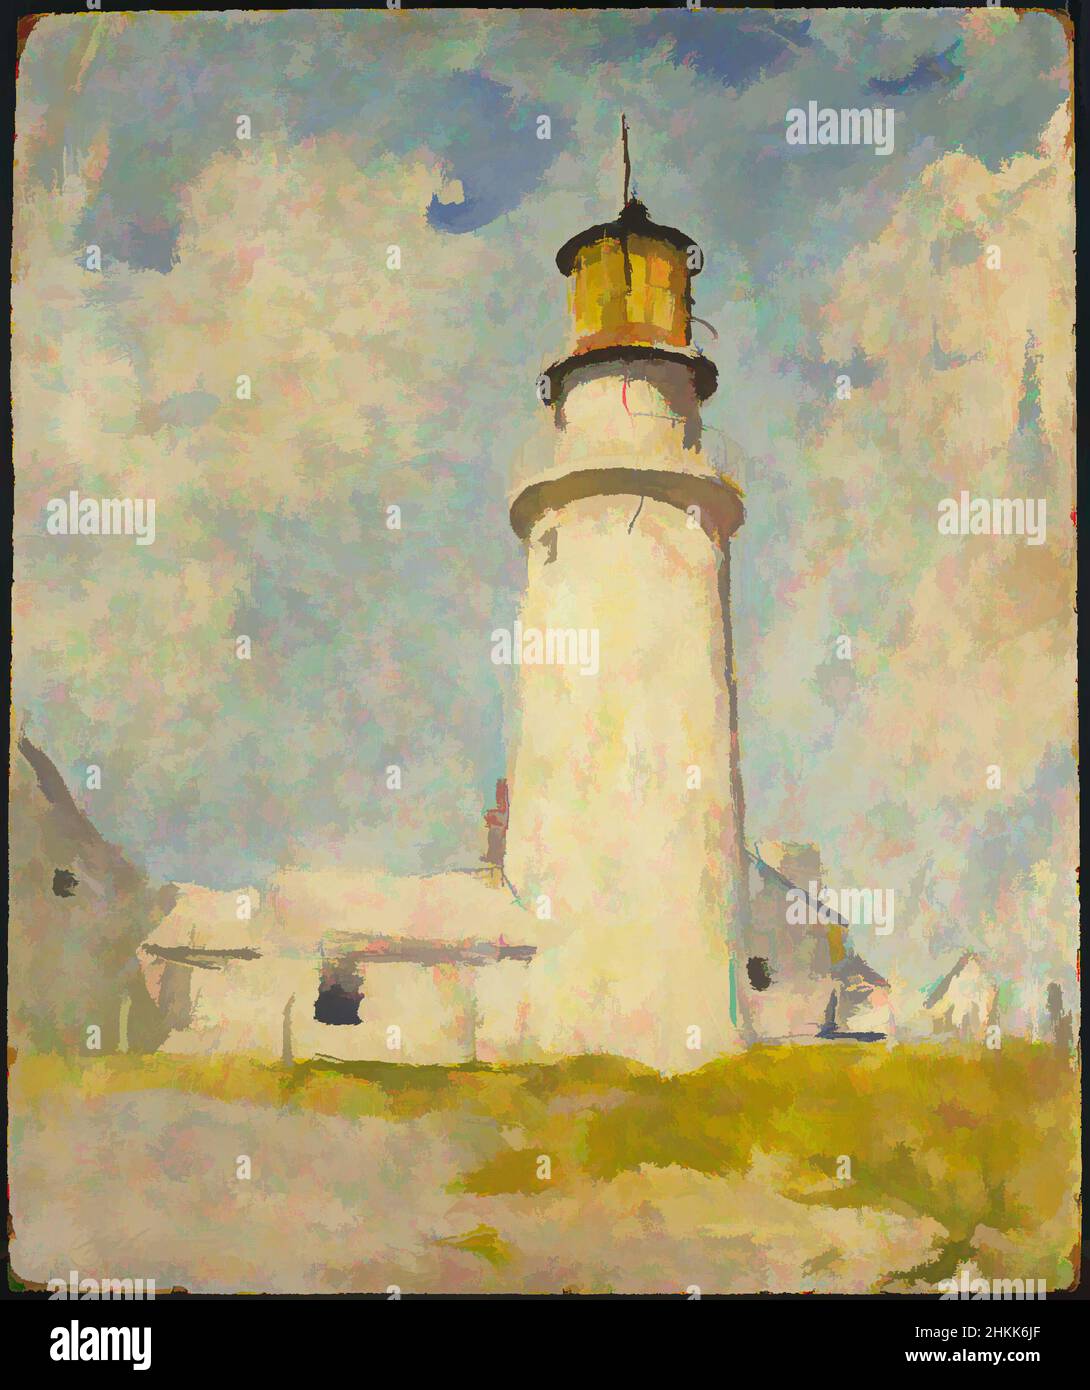 Art inspired by Highland Light, Charles W. Hawthorne, American, 1872-1930, Oil on panel, ca. 1925, 24 x 19 13/16 in., 60.9 x 50.3 cm, building, ca. 1925, clouds, landscape, lighthouse, ndd7, oil on panel, painting, phallic, sky, sunny, Classic works modernized by Artotop with a splash of modernity. Shapes, color and value, eye-catching visual impact on art. Emotions through freedom of artworks in a contemporary way. A timeless message pursuing a wildly creative new direction. Artists turning to the digital medium and creating the Artotop NFT Stock Photo